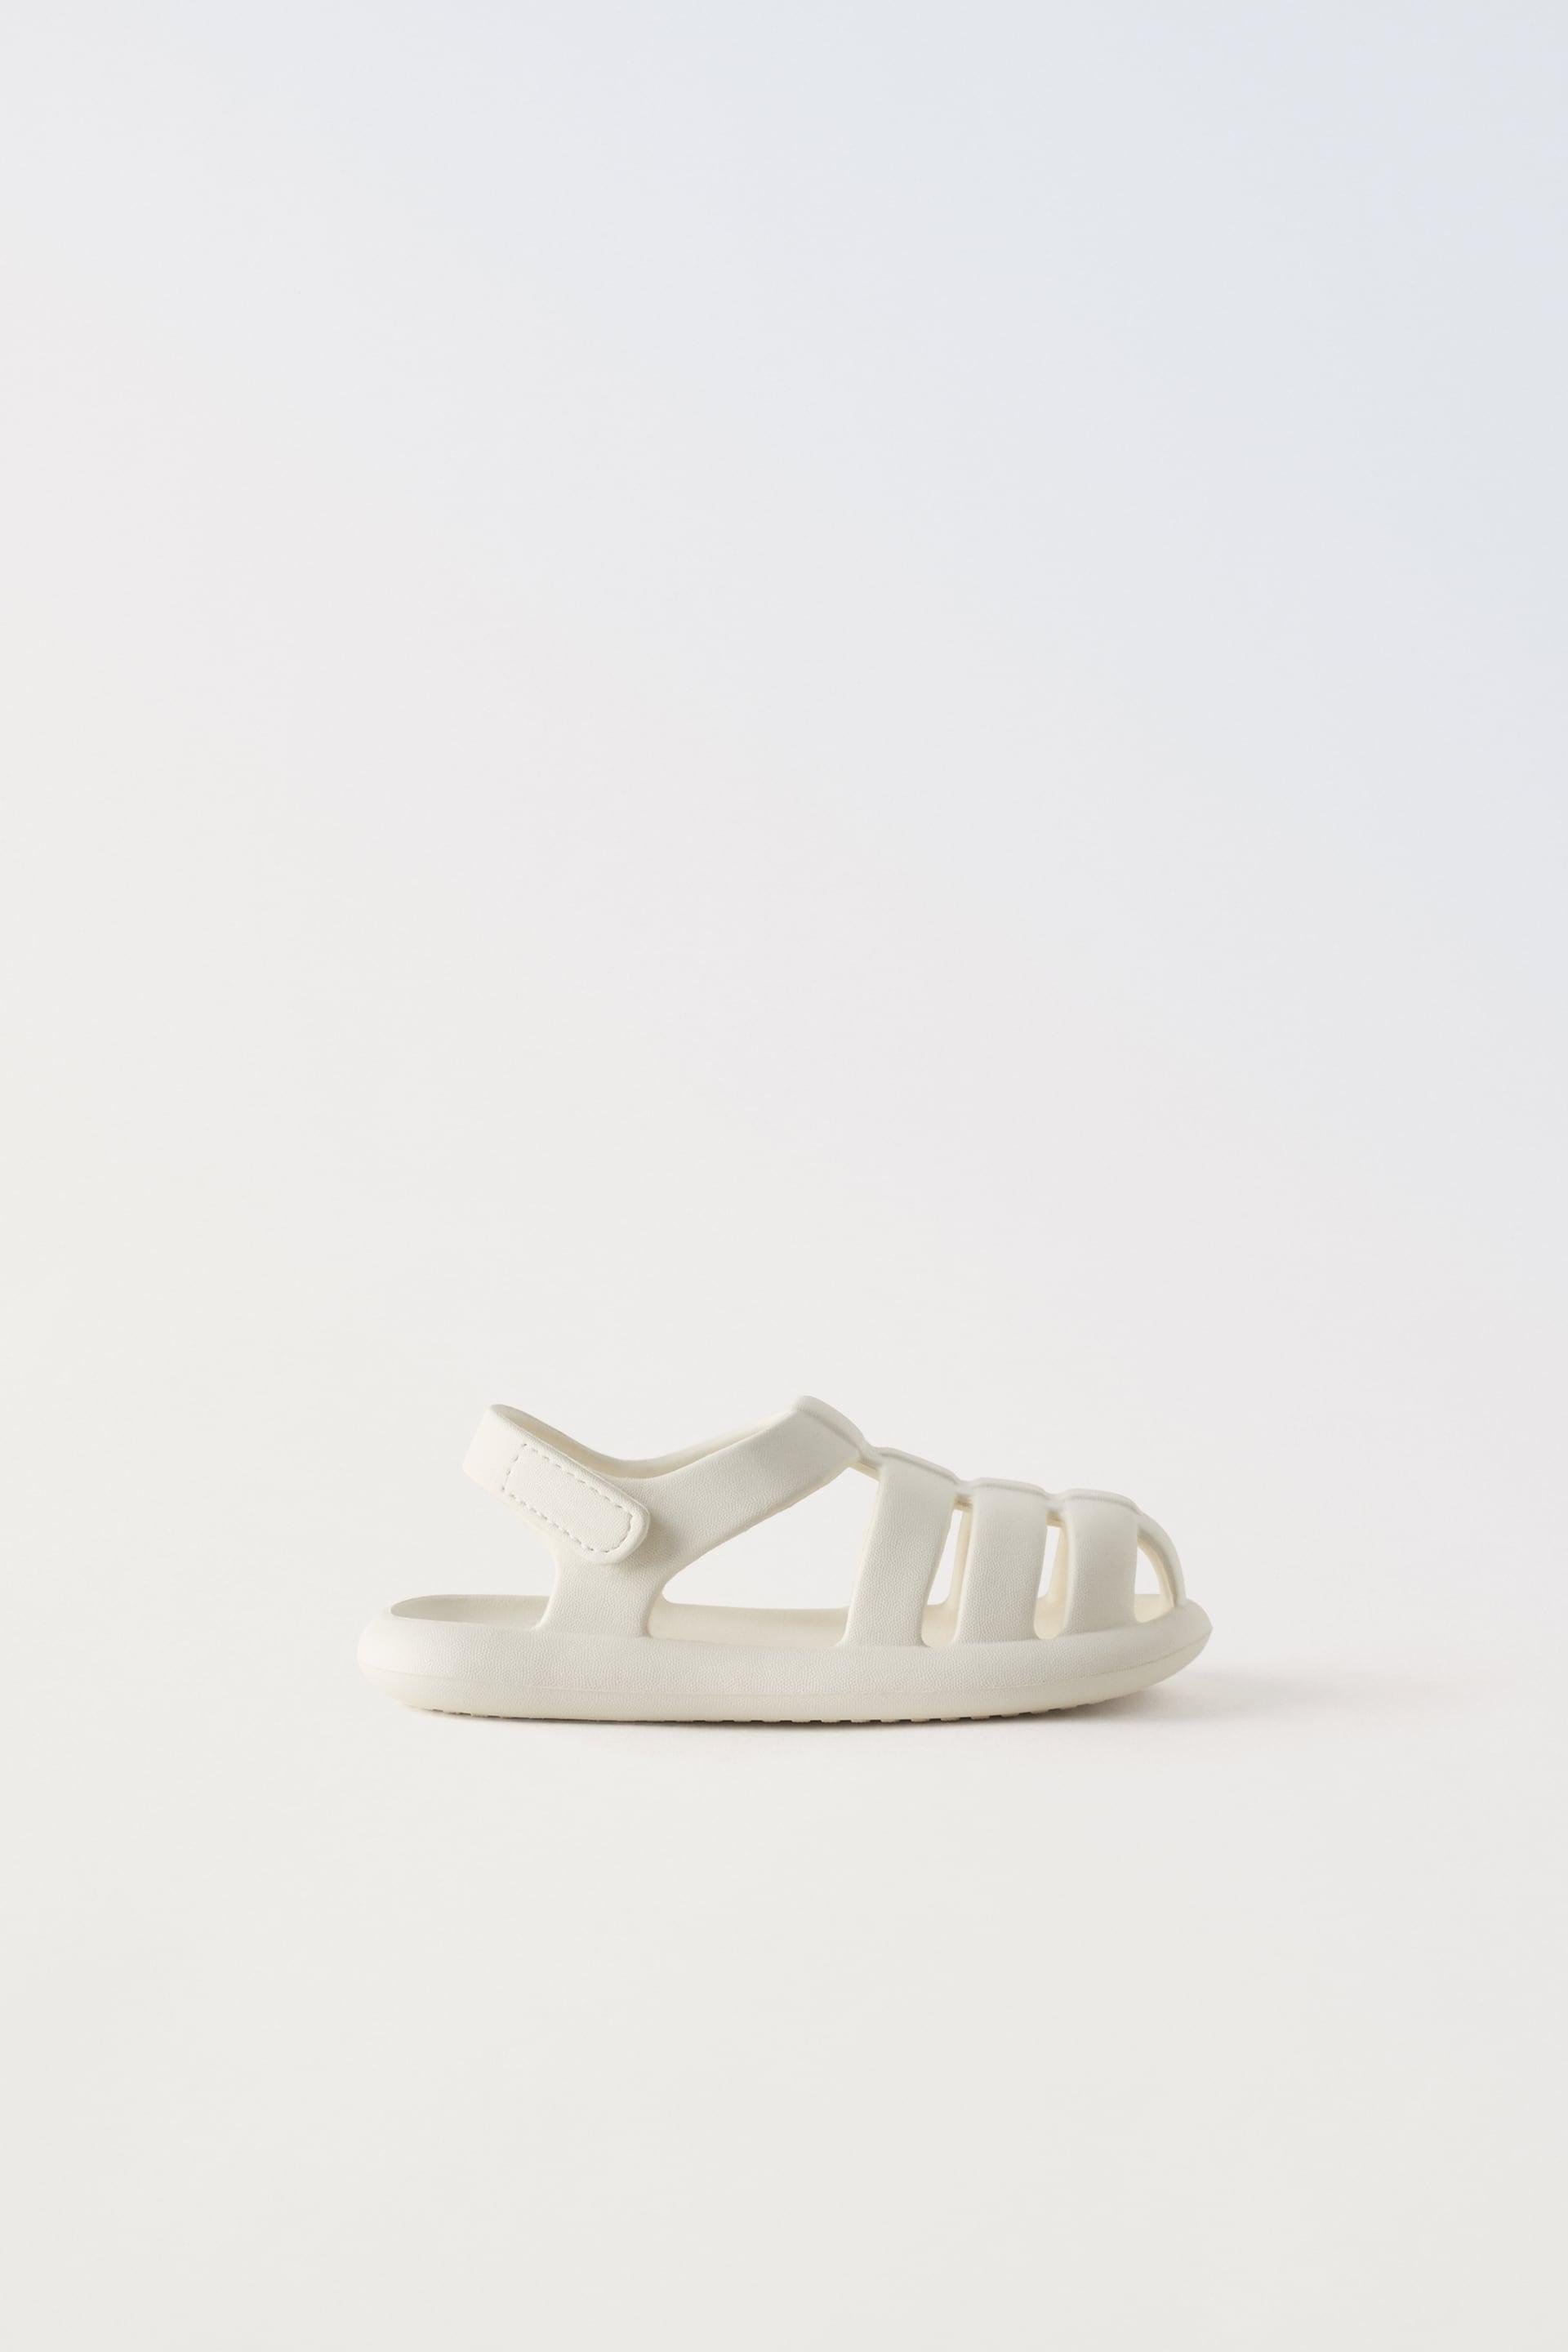 RUBBERIZED CAGE SANDALS by ZARA